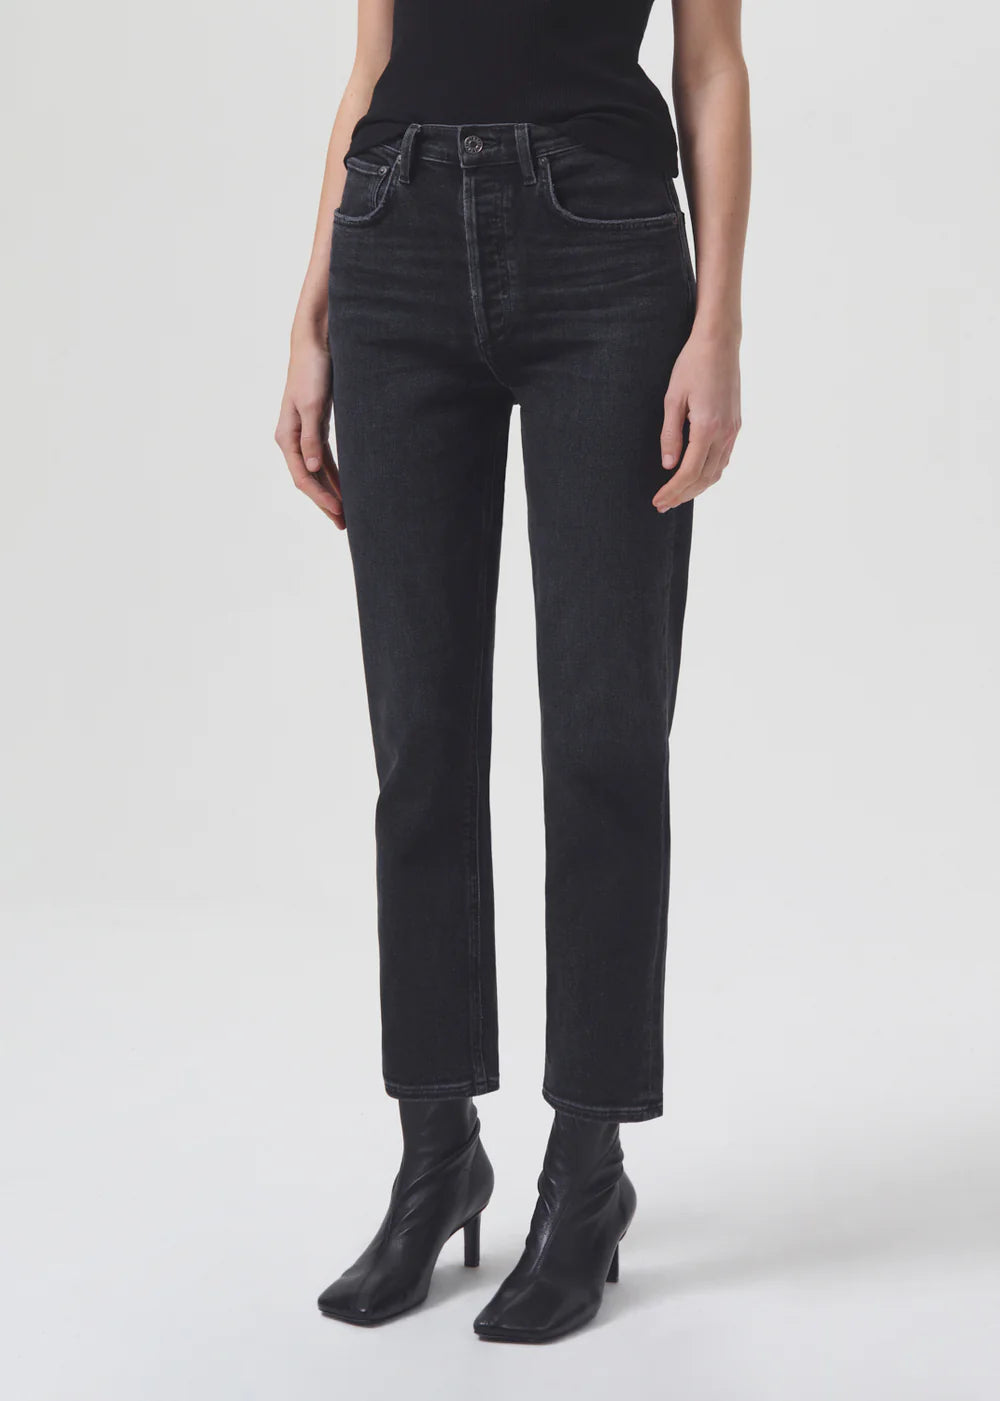 A woman wearing AGOLDE Riley Straight Crop - Panoramic black jeans.